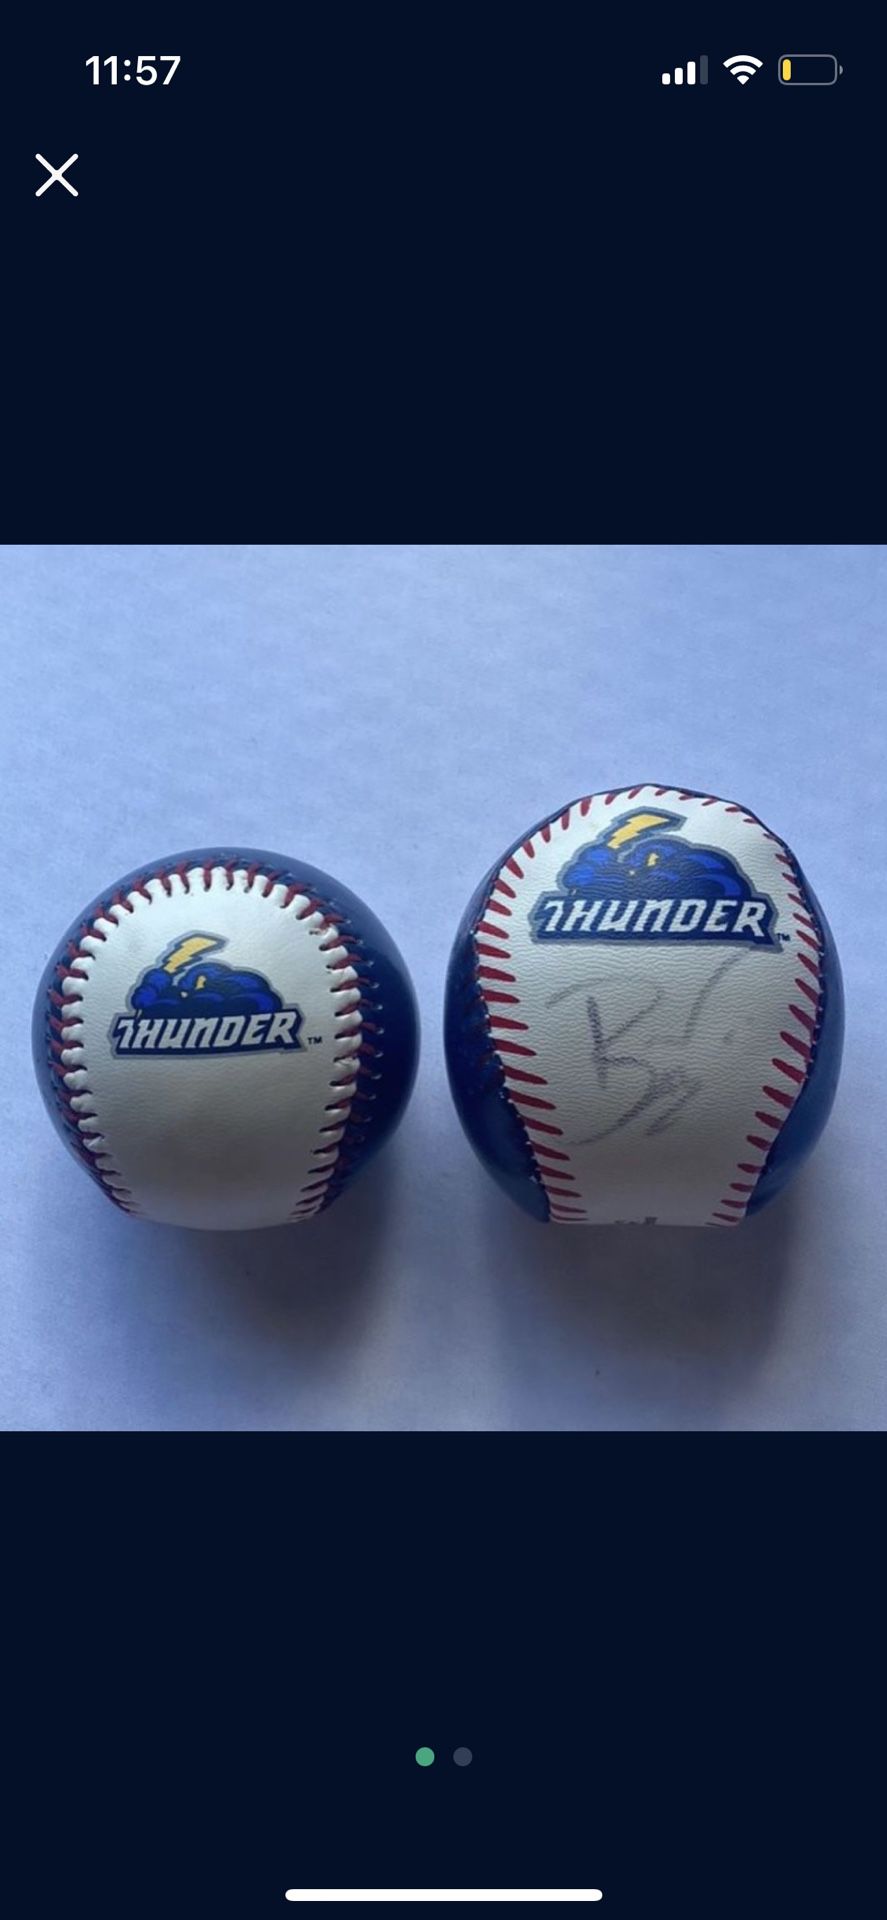 2 thunder baseballs (left one was caught during a game and right one is signed)